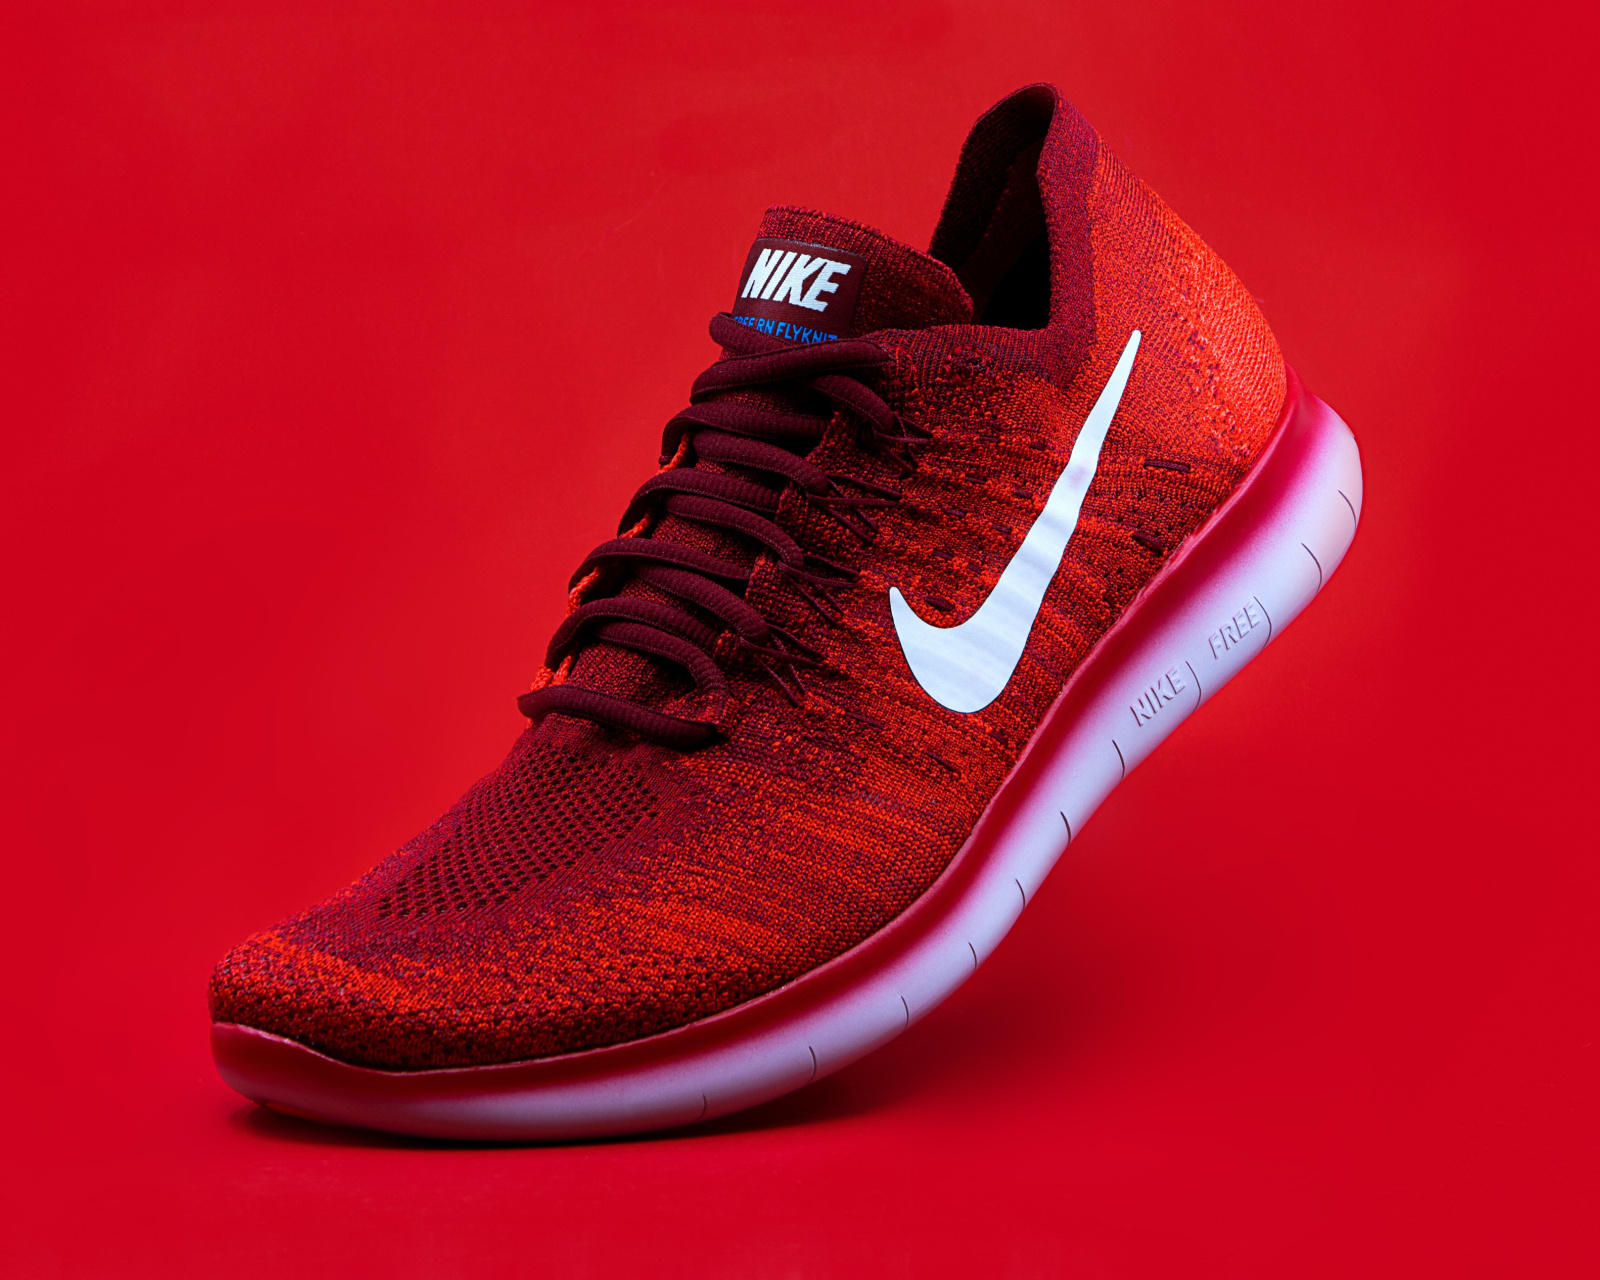 Red Nike Shoes wallpaper 1600x1280